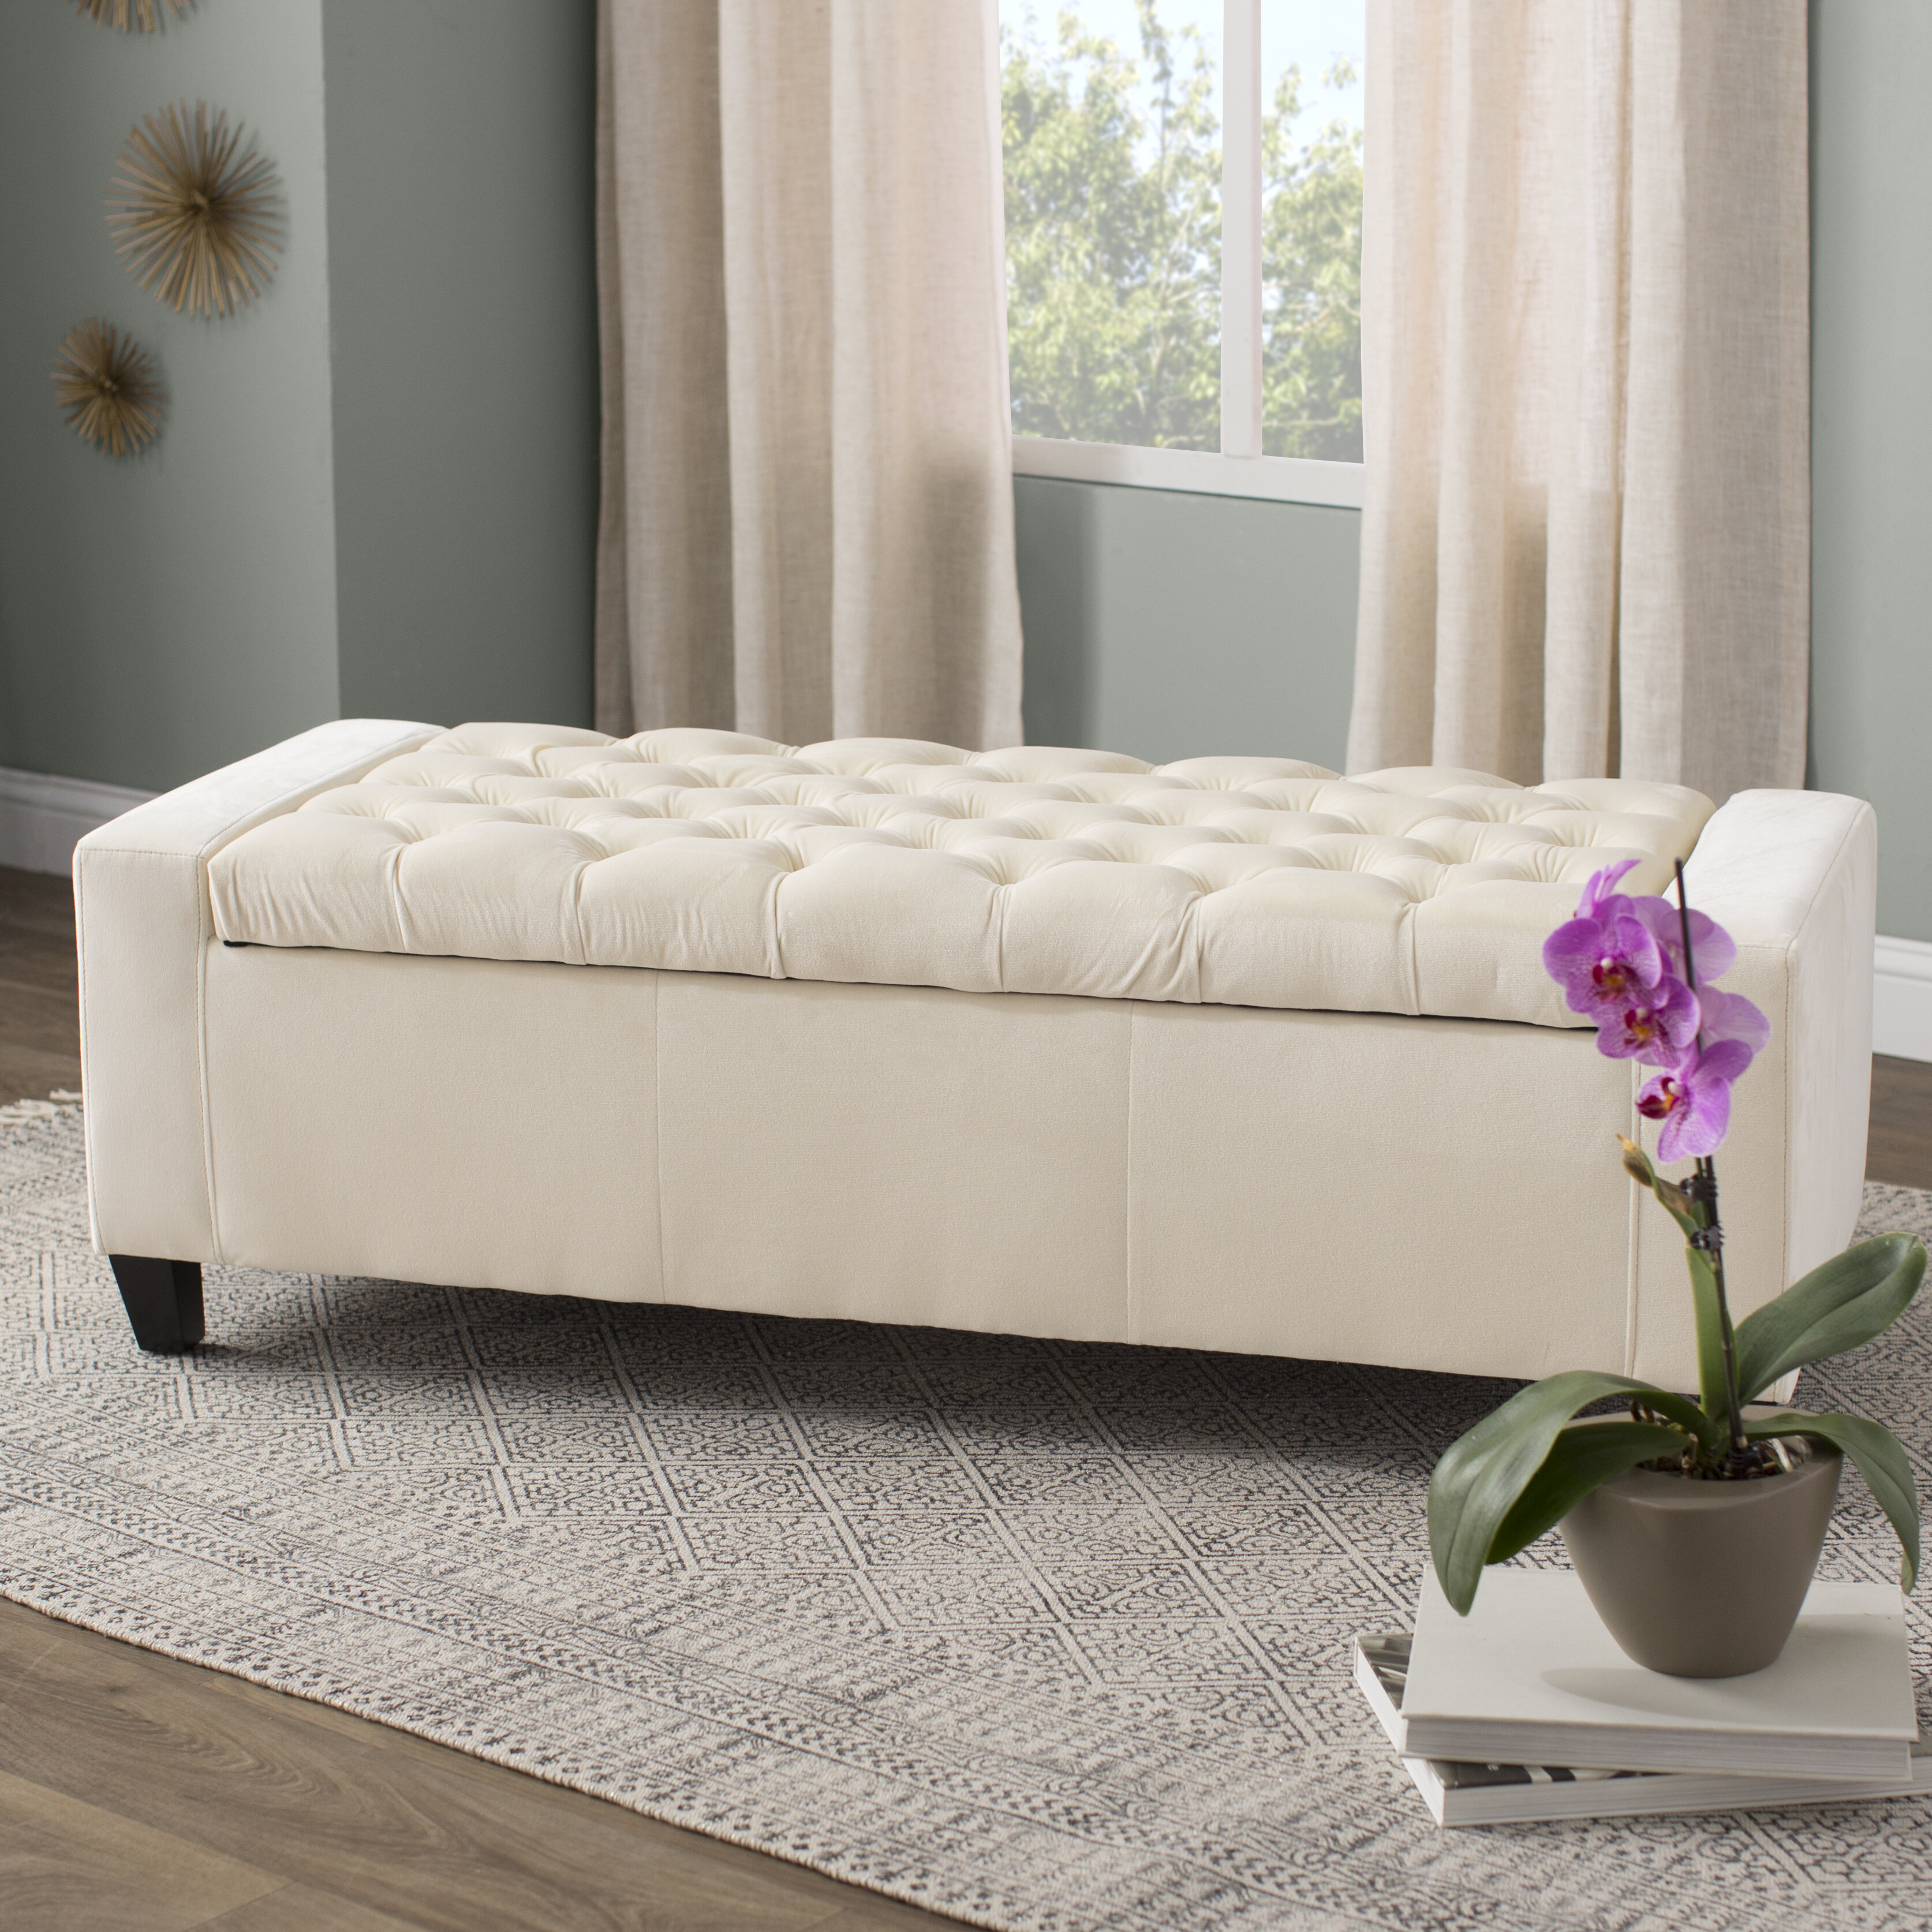 Leading Trends In Bedroom Upholstered Bench Designs